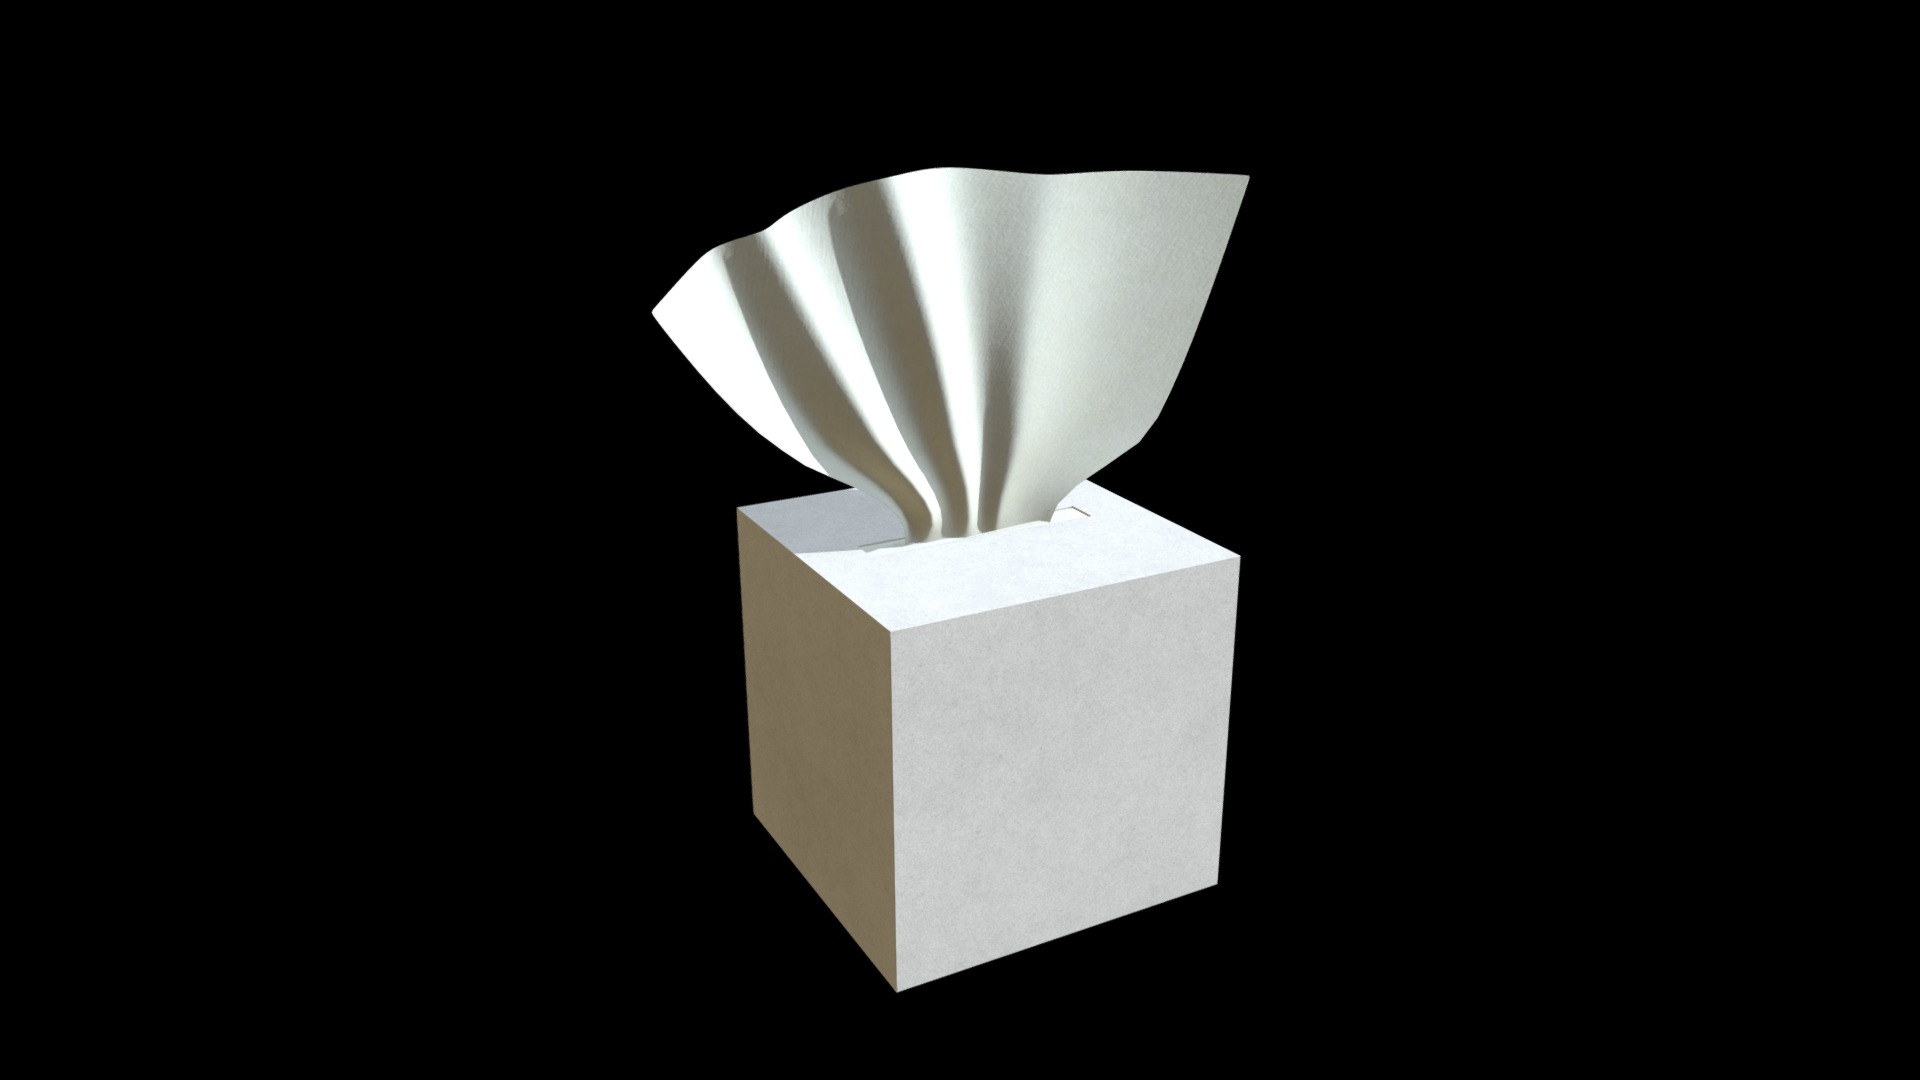 3D model Tissue box 2 - This is a 3D model of the Tissue box 2. The 3D model is about a white cube with a black background.